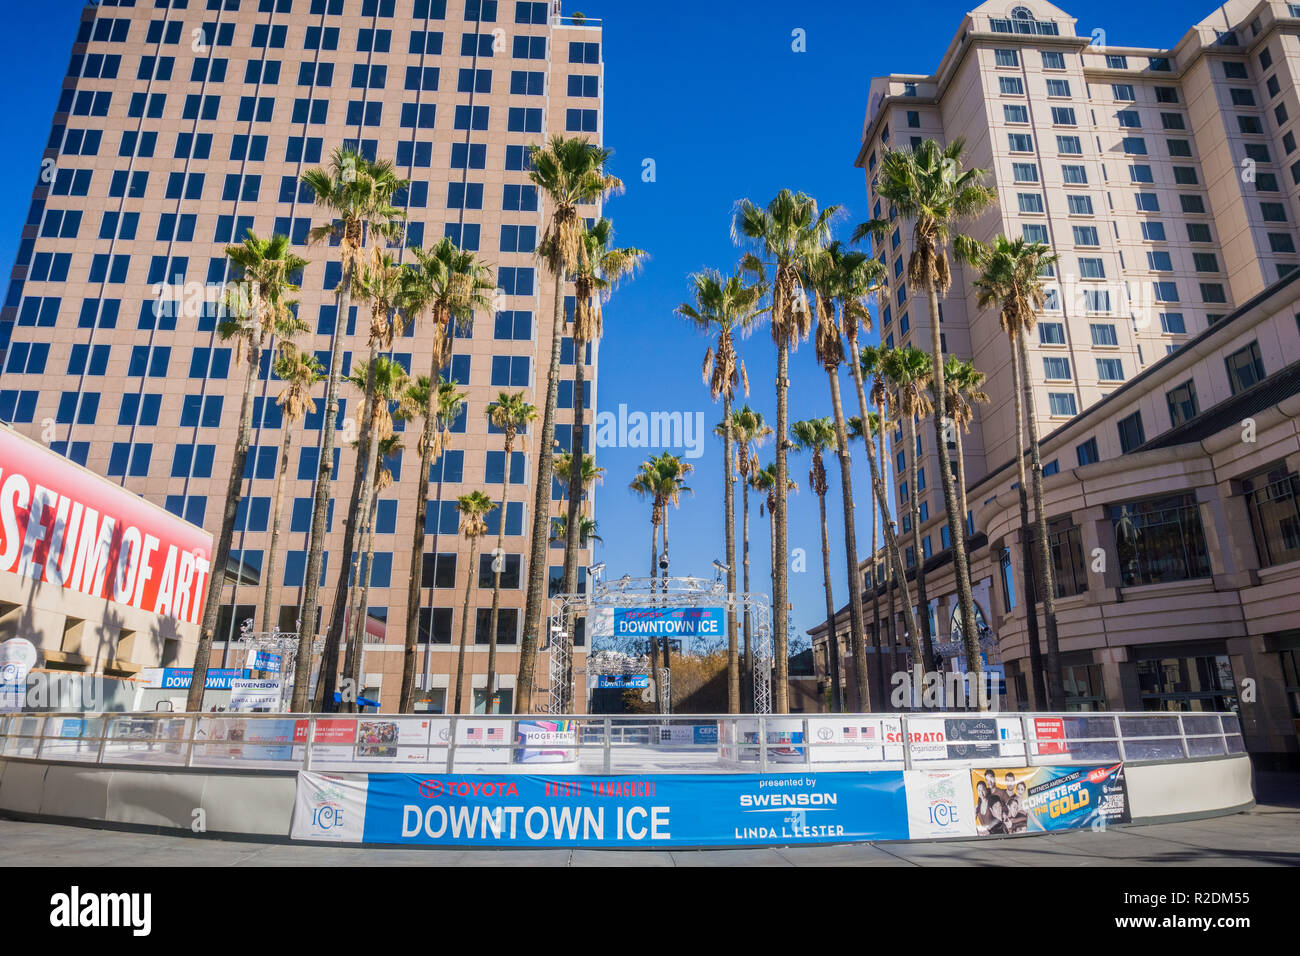 December 6, 2017 San Jose / CA / USA - 'Downtown Ice', a seasonal, family friendly outdoor skating rink situated in Circle of Palms Plaza Stock Photo